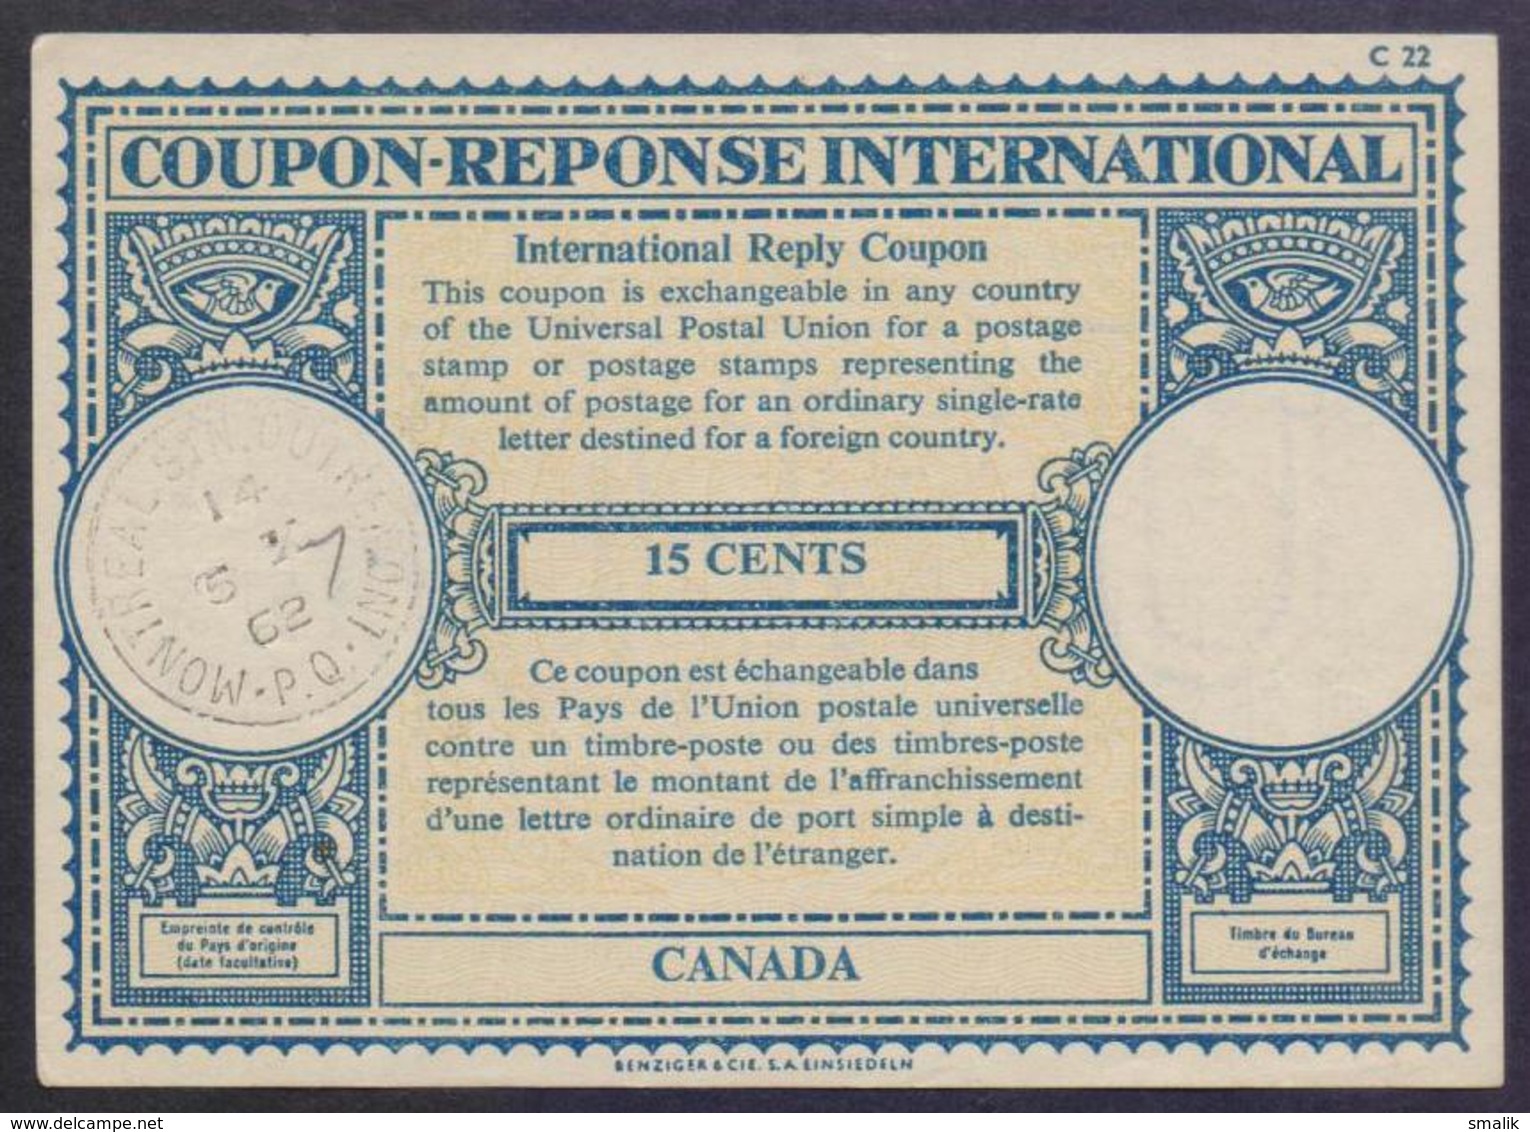 CANADA - 15 Cents London Type IRC COUPON REPONSE INTERNATIONAL REPLY, UPU, Cancelled 5.10. 1962 - Cupones Respuesta